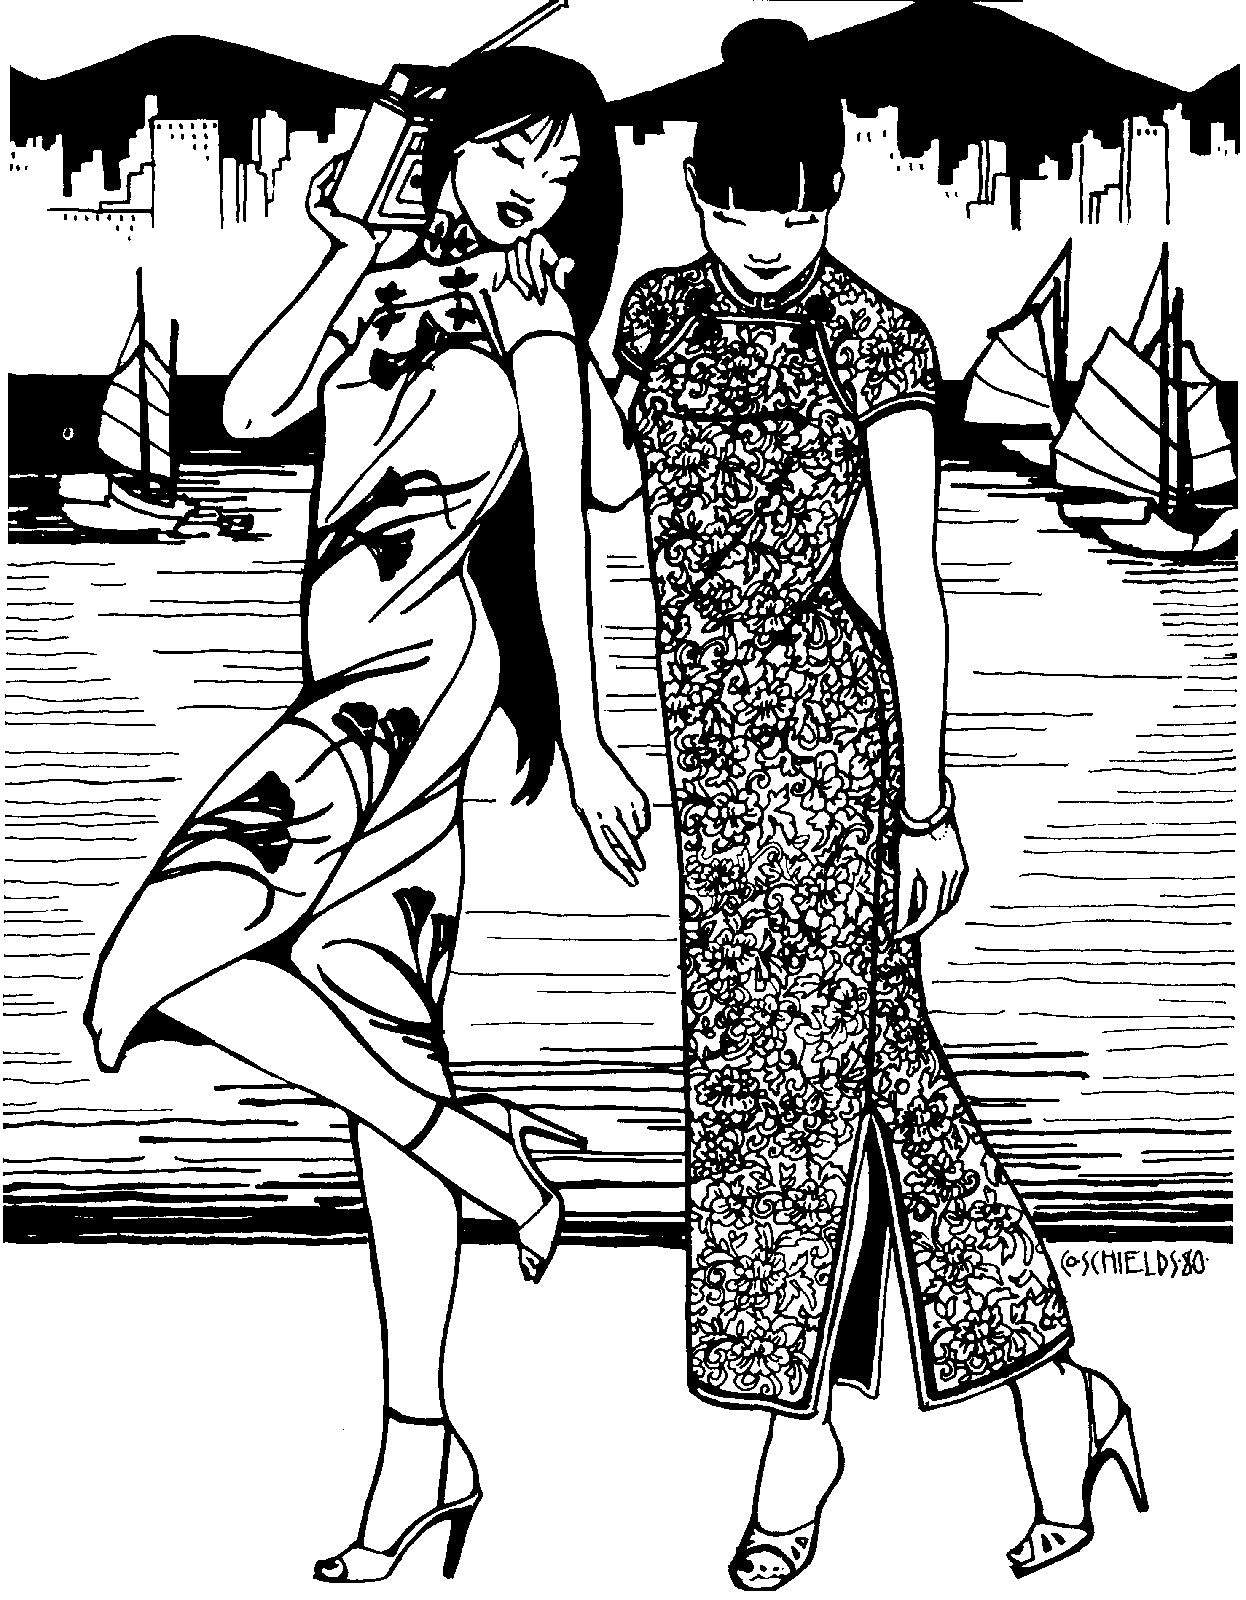 Asian woman wearing a gold brocade knee-length cheogsam walking down stone steps outside.